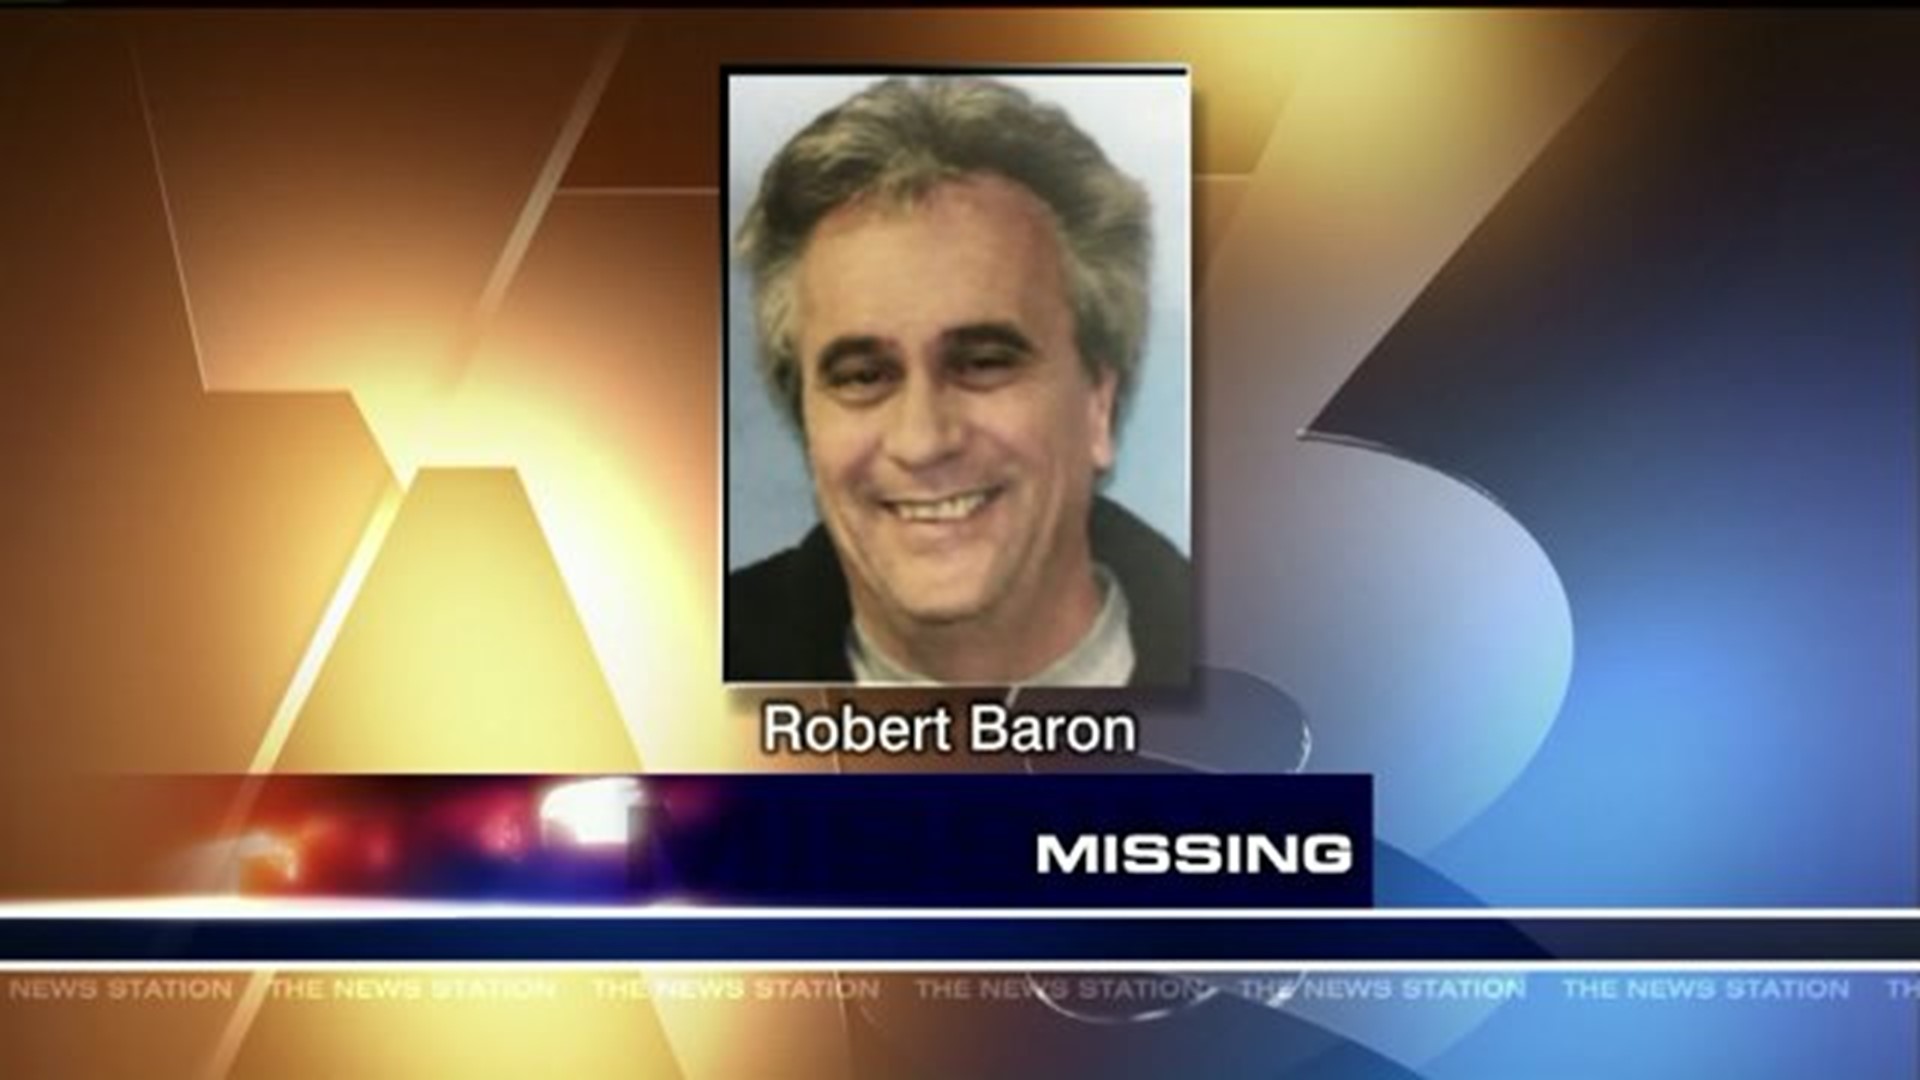 Crews Searched in Luzerne County for Missing Old Forge Man